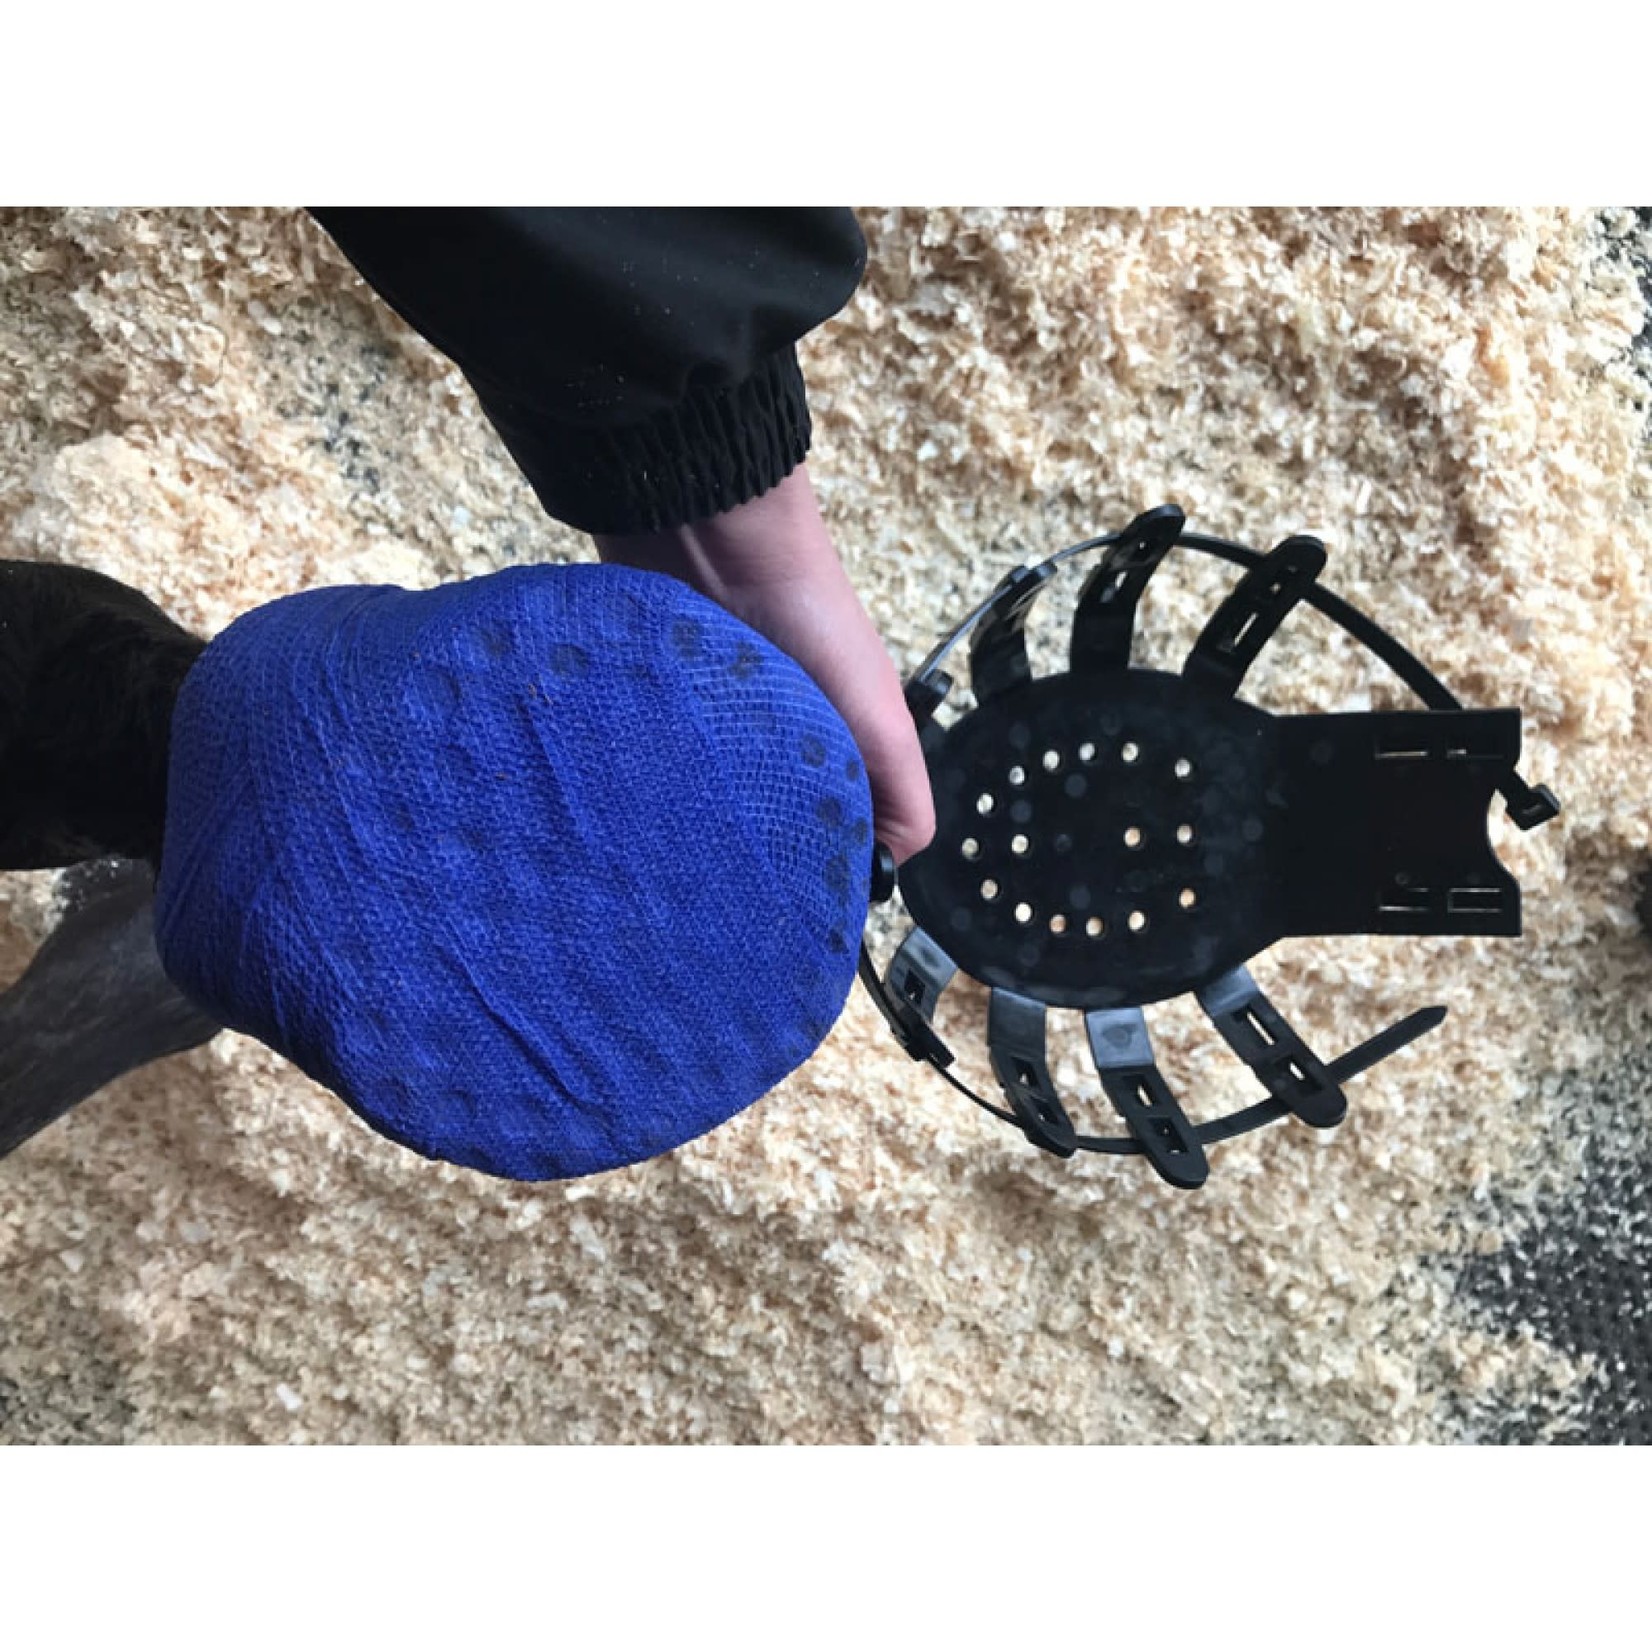 Vet-Way Vet-Strider Poultice Boot & Hoof Protection